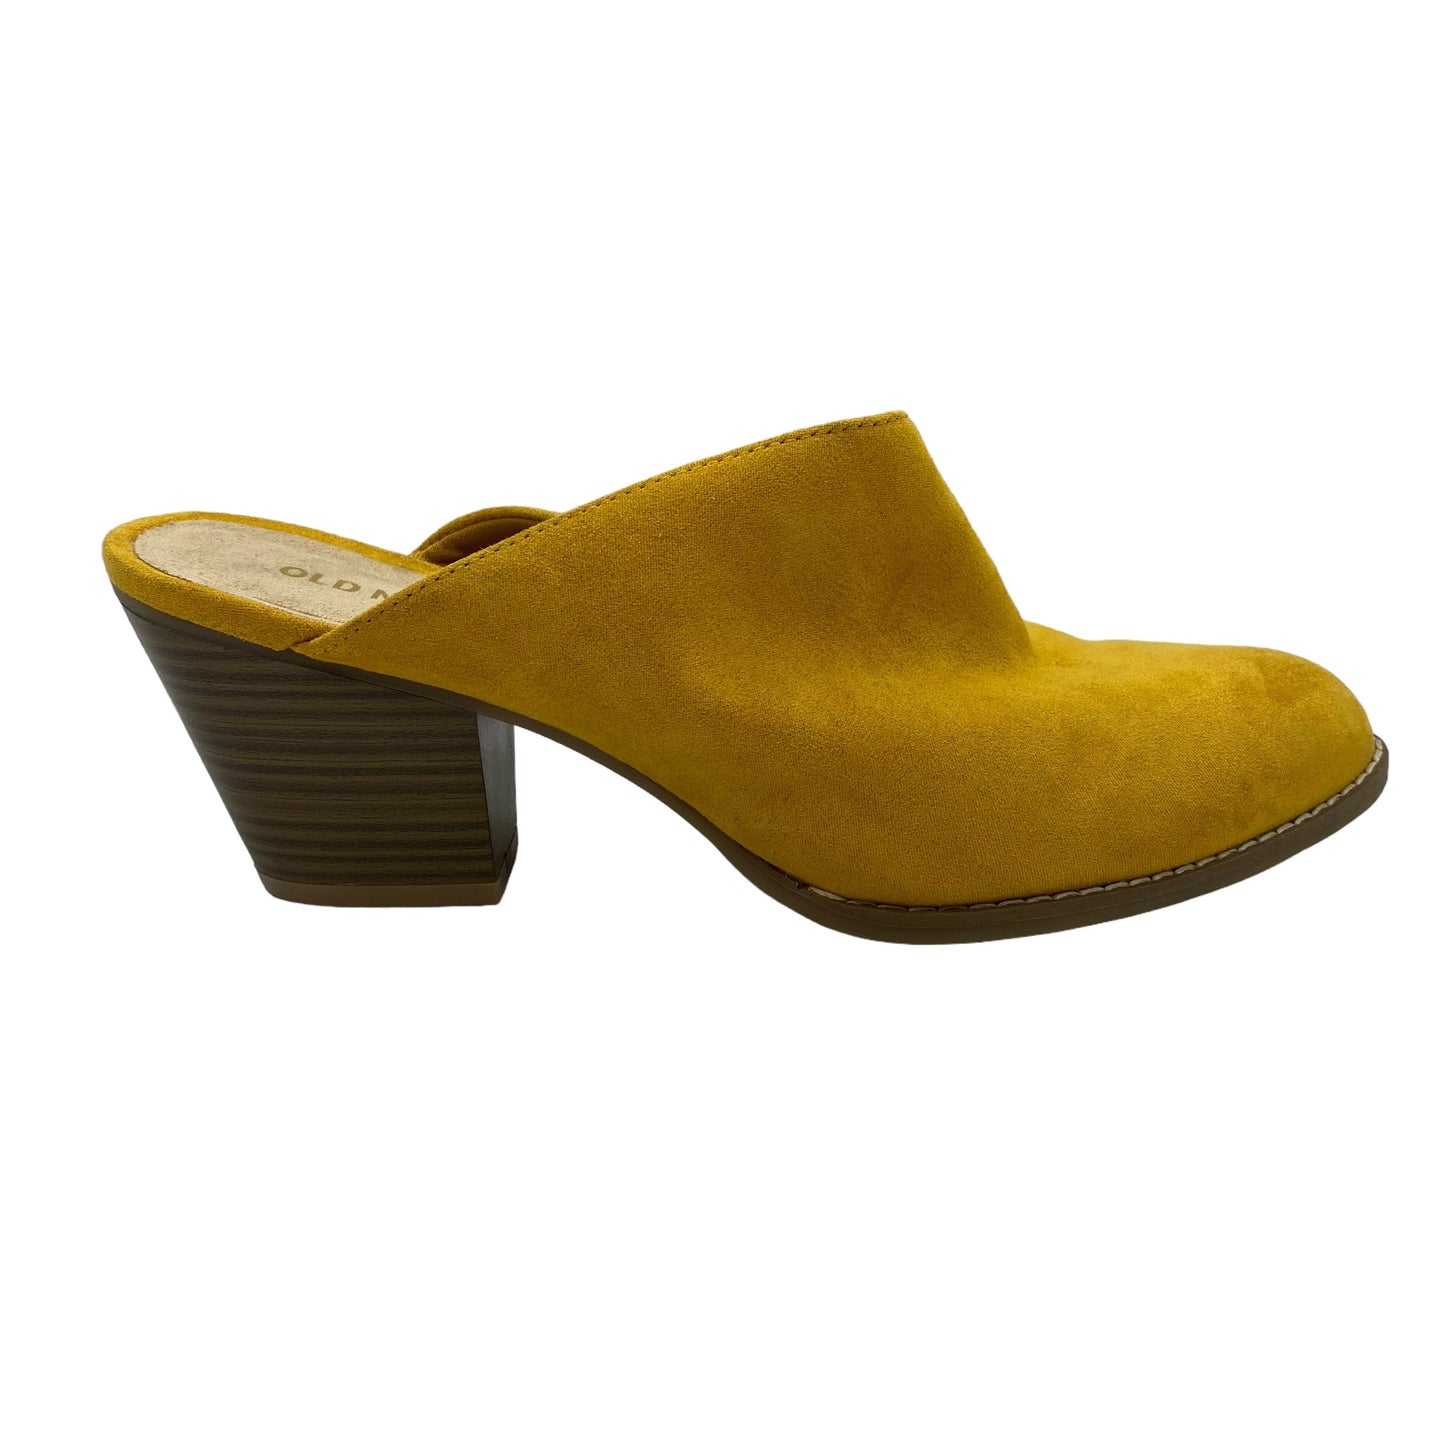 Yellow Shoes Heels Block Old Navy, Size 8